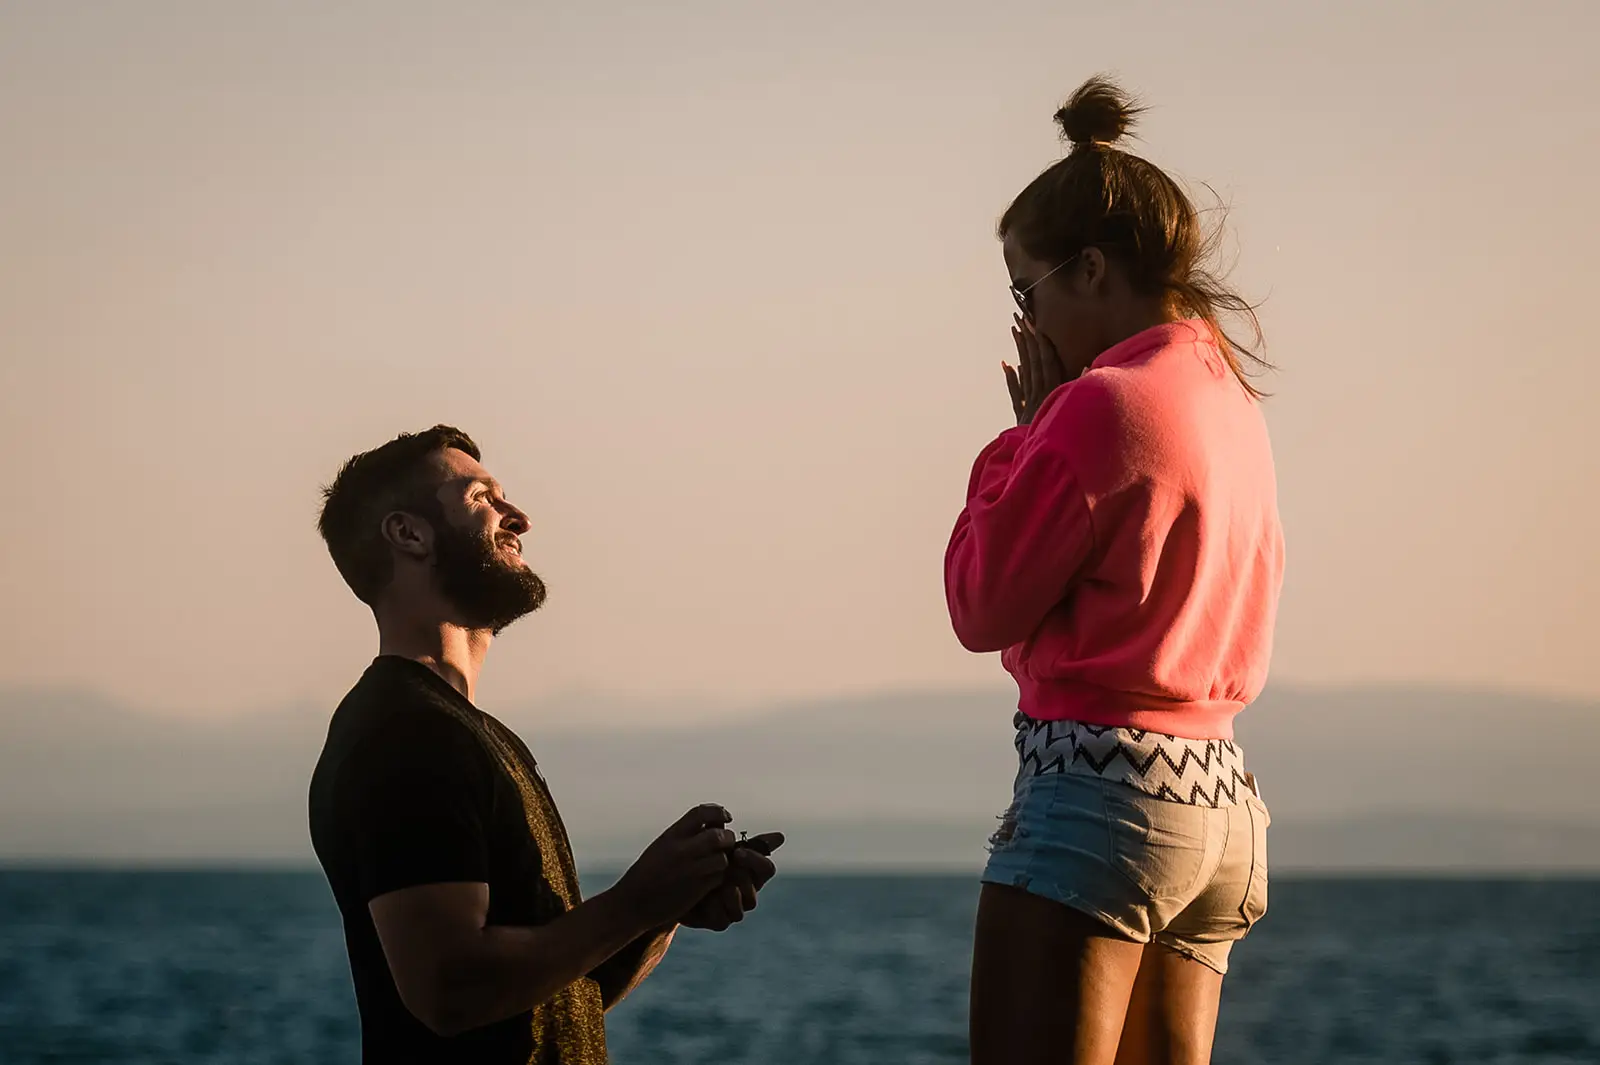 man proposes to his girlfriend on the beach in Sechelt at sunset.